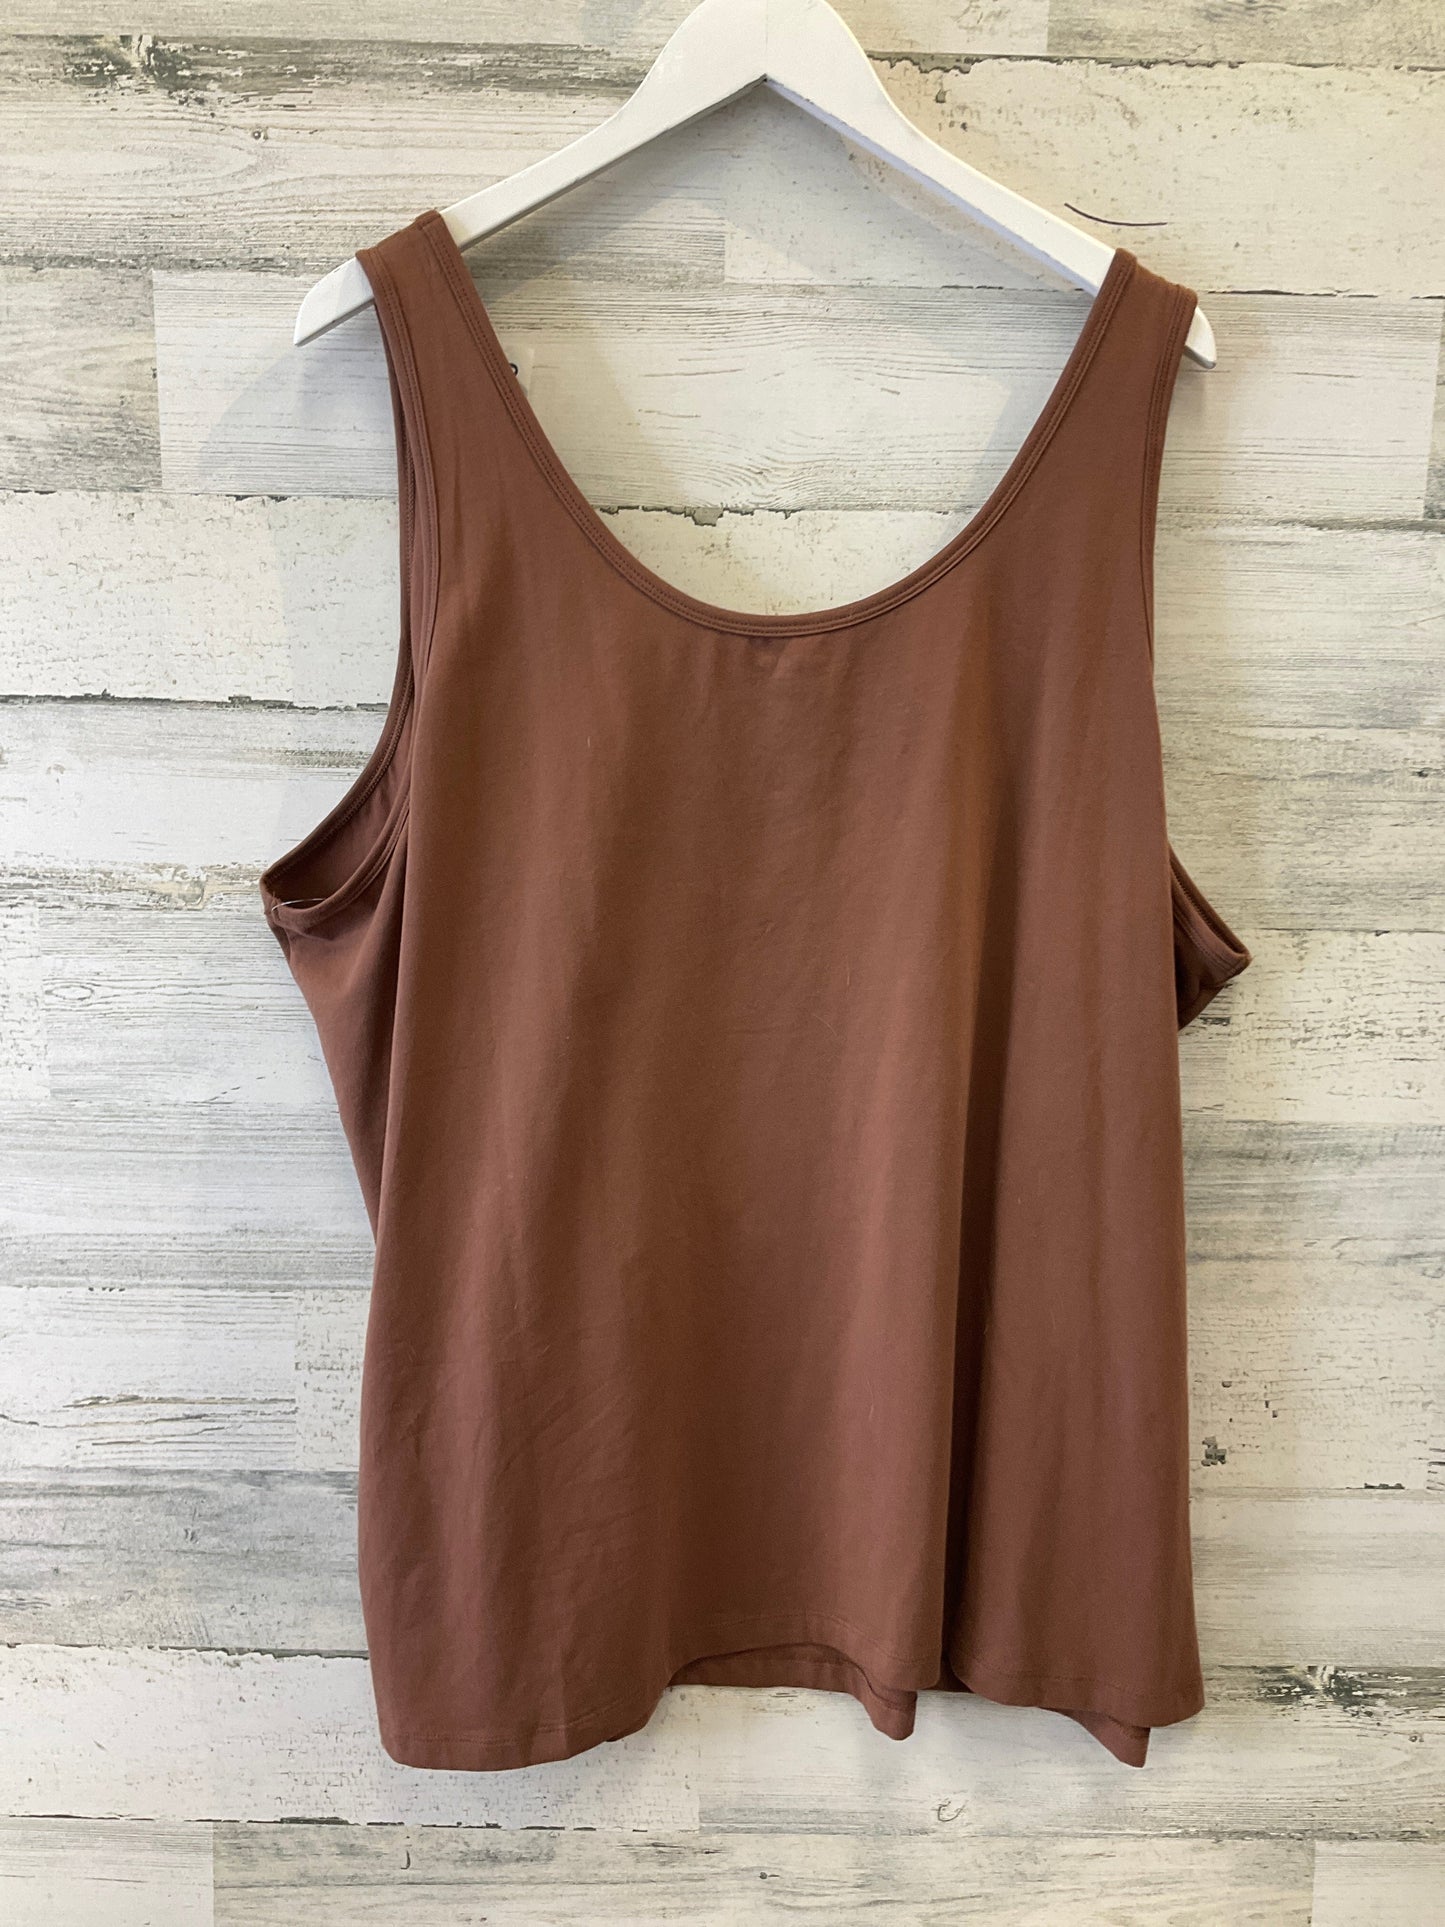 Brown Tank Top Old Navy, Size 4x